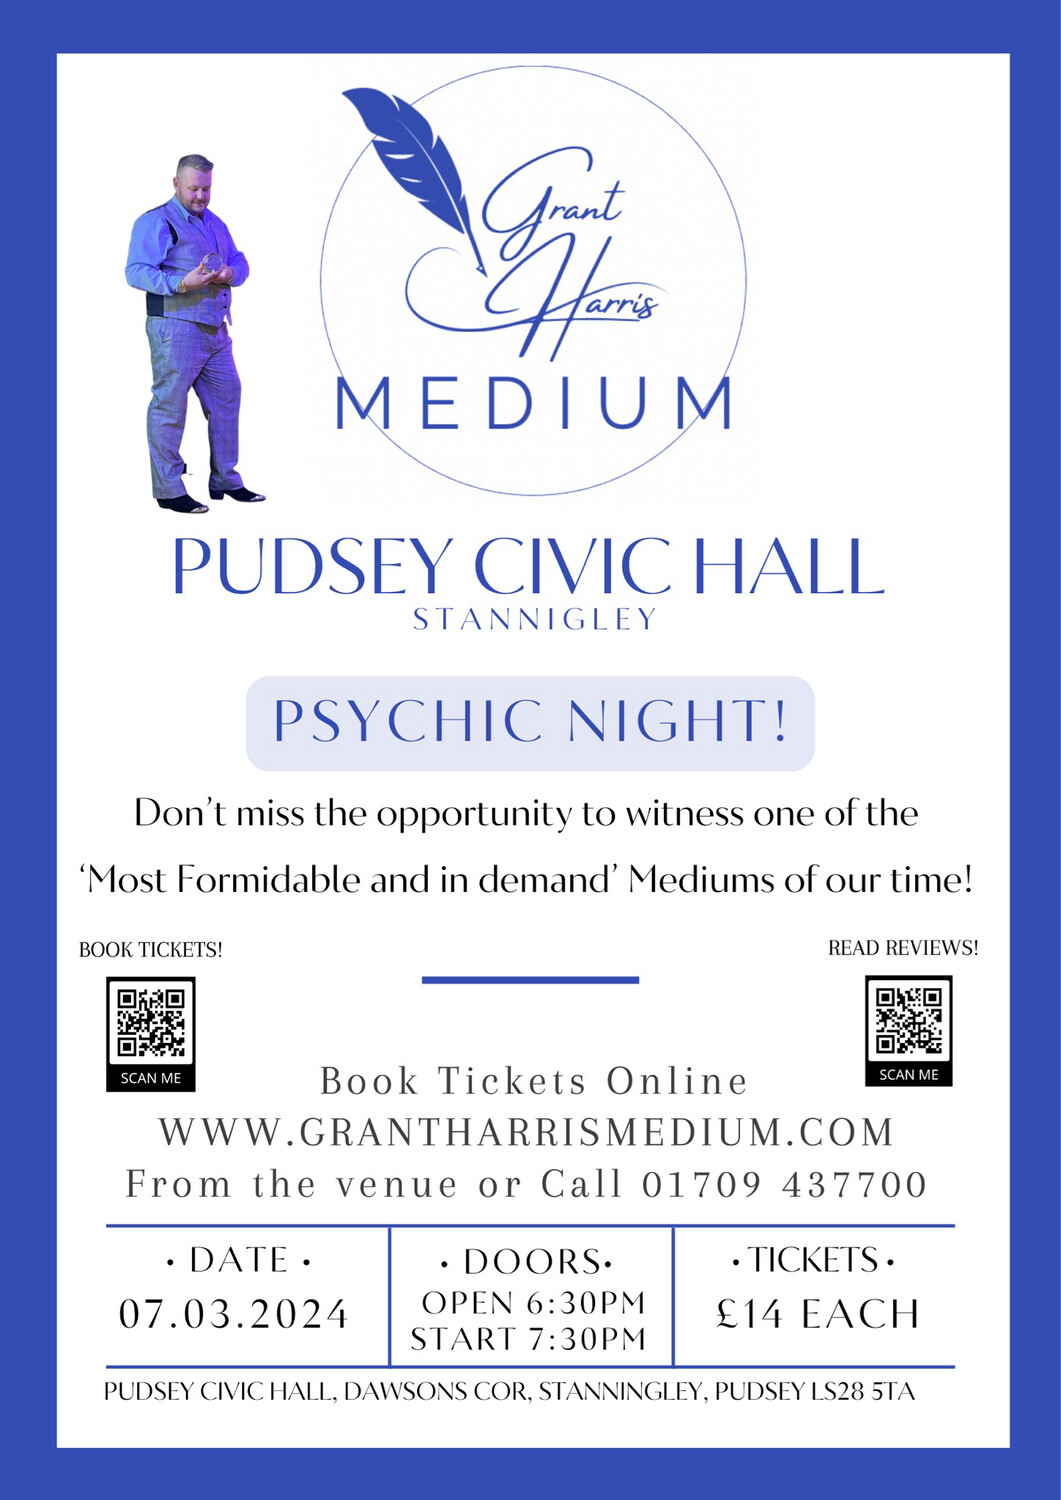 Psychic Night | Pudsey Civic Hall, Pudsey, Leeds, Thu 7th March 2024